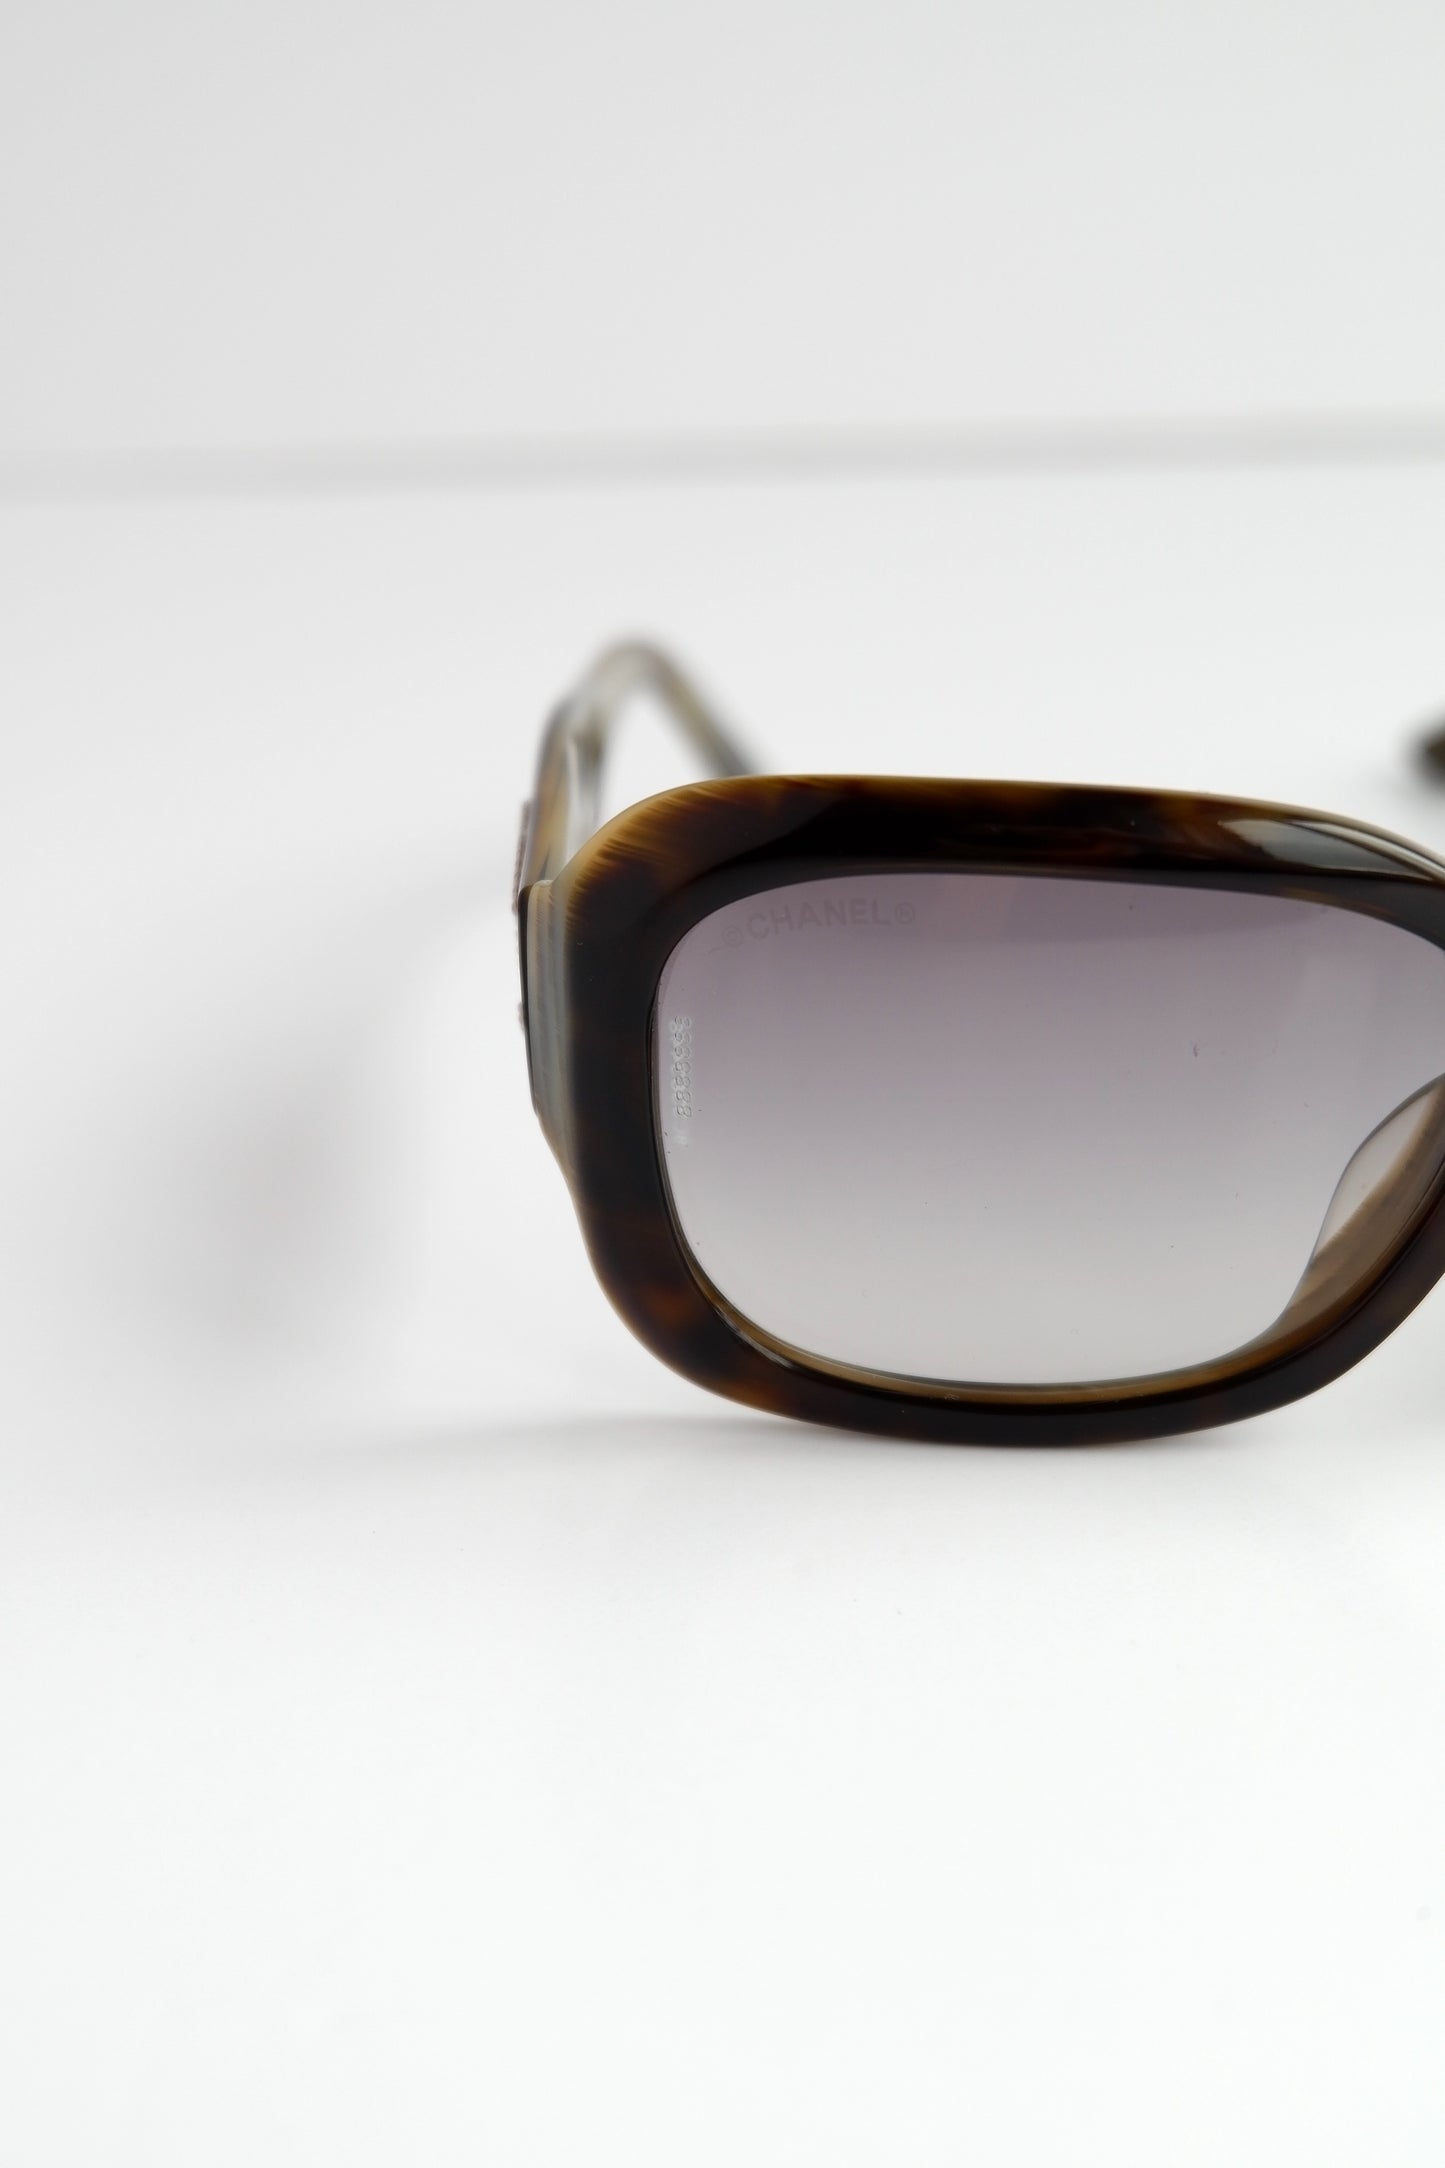 Authentic Preowned Chanel Brown Tortoise Square Frame Sunglasses